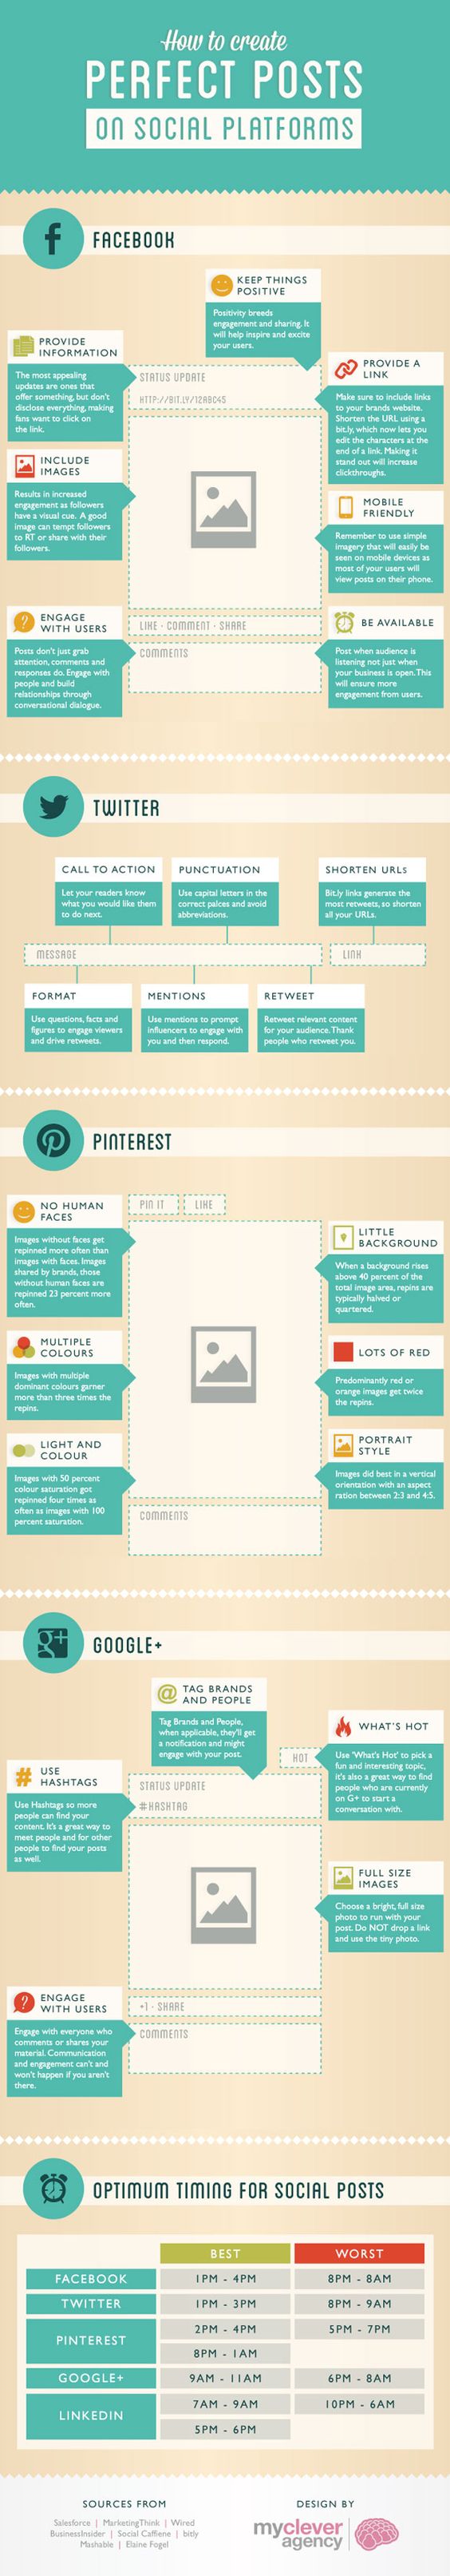 How To Create Effective Posts On The 4 Main Social Sites [#Infographic] - Bit Rebels